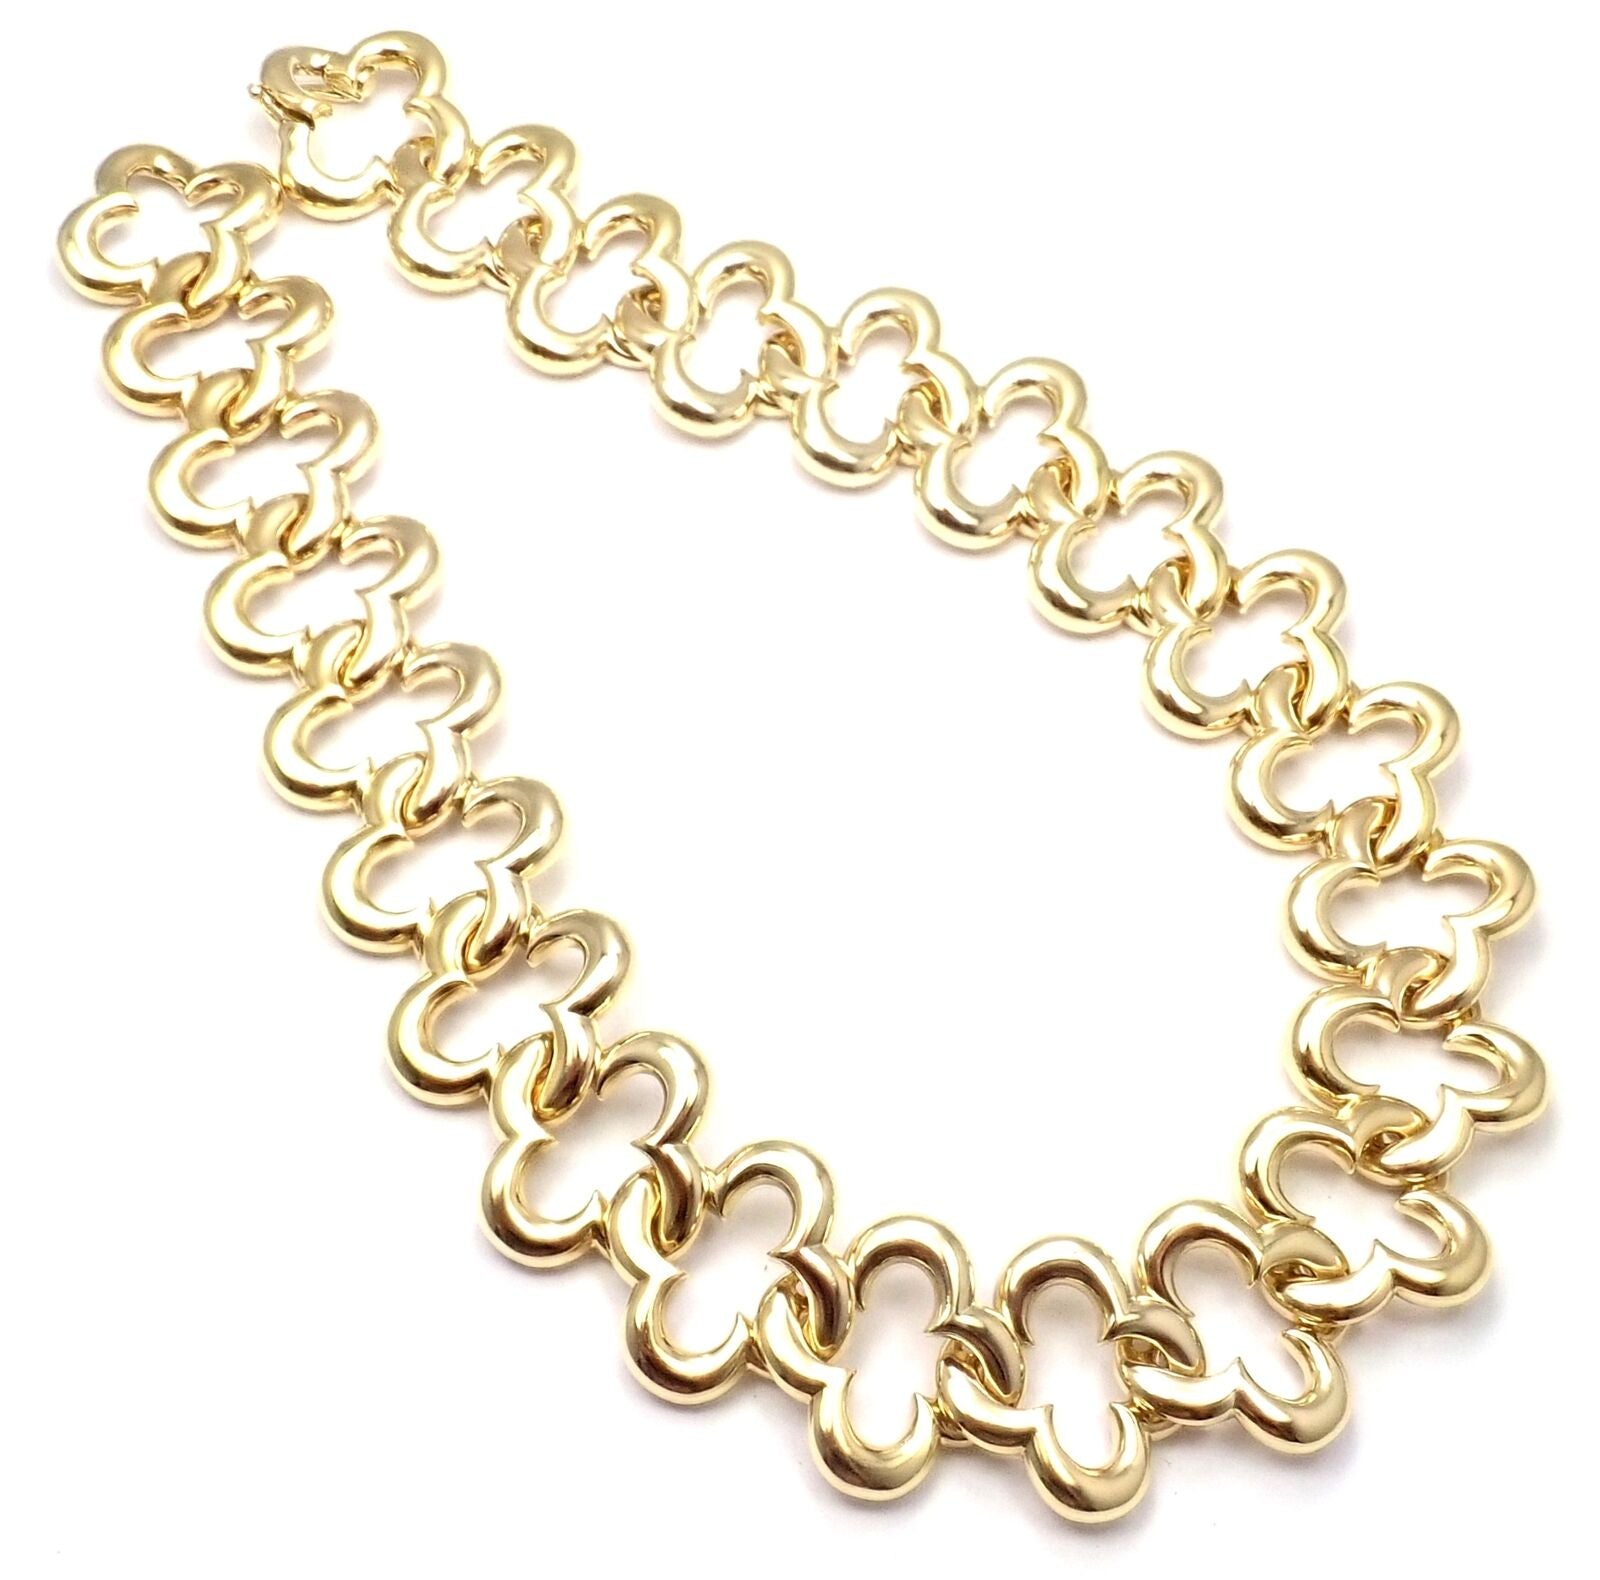 Van Cleef & Arpels Jewelry & Watches:Fine Jewelry:Necklaces & Pendants Authentic Van Cleef & Arpels 18k Yellow Gold Large Alhambra Choker Necklace 1998